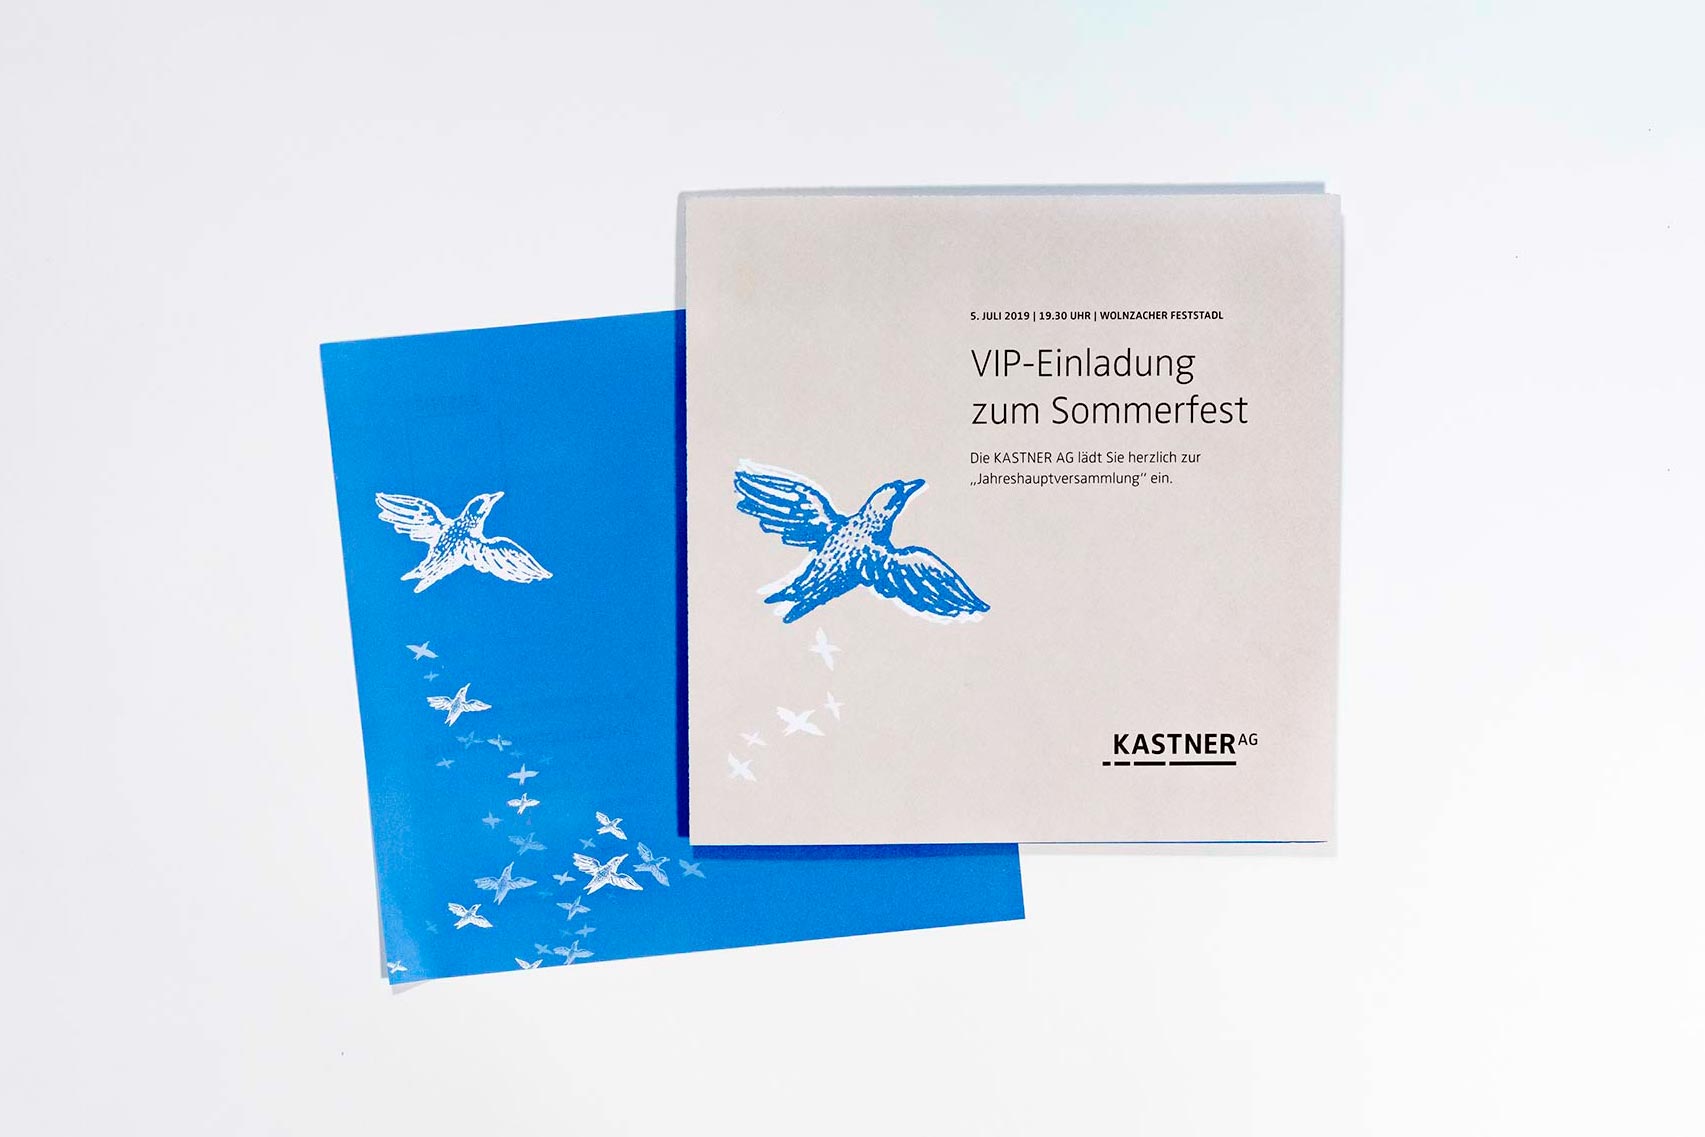 A photo shows the business card and the sales folder of Kastner AG.